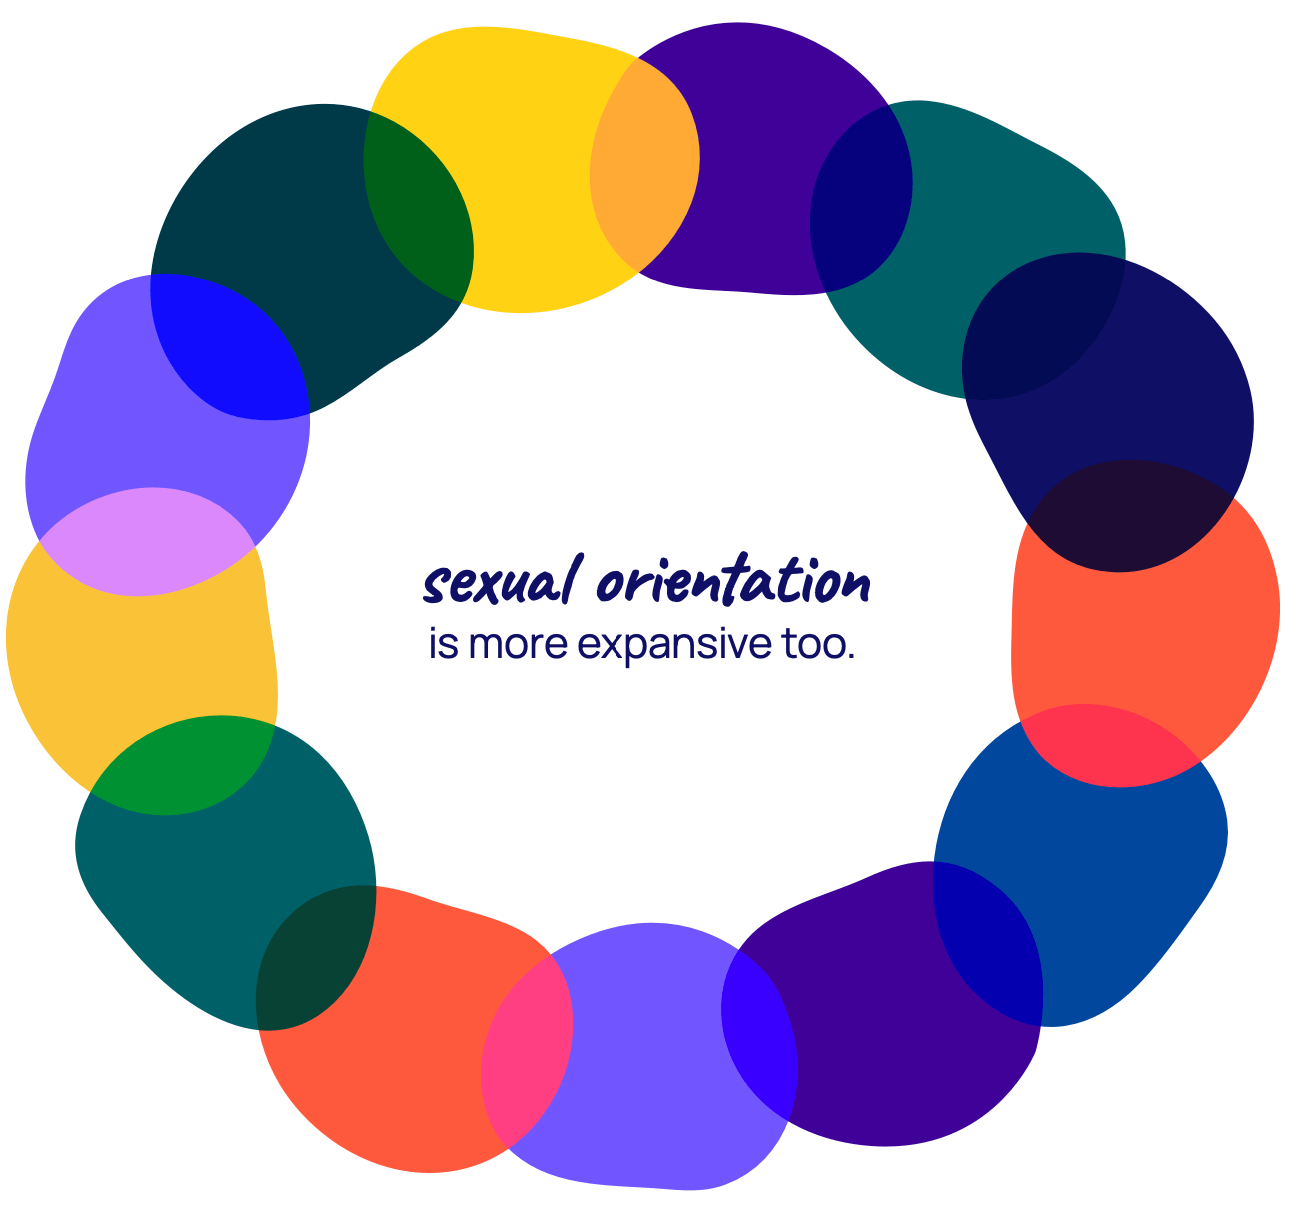 13 different colored round shapes in a circle and merging together. The graphic says "sexual orientation is more expansive too".